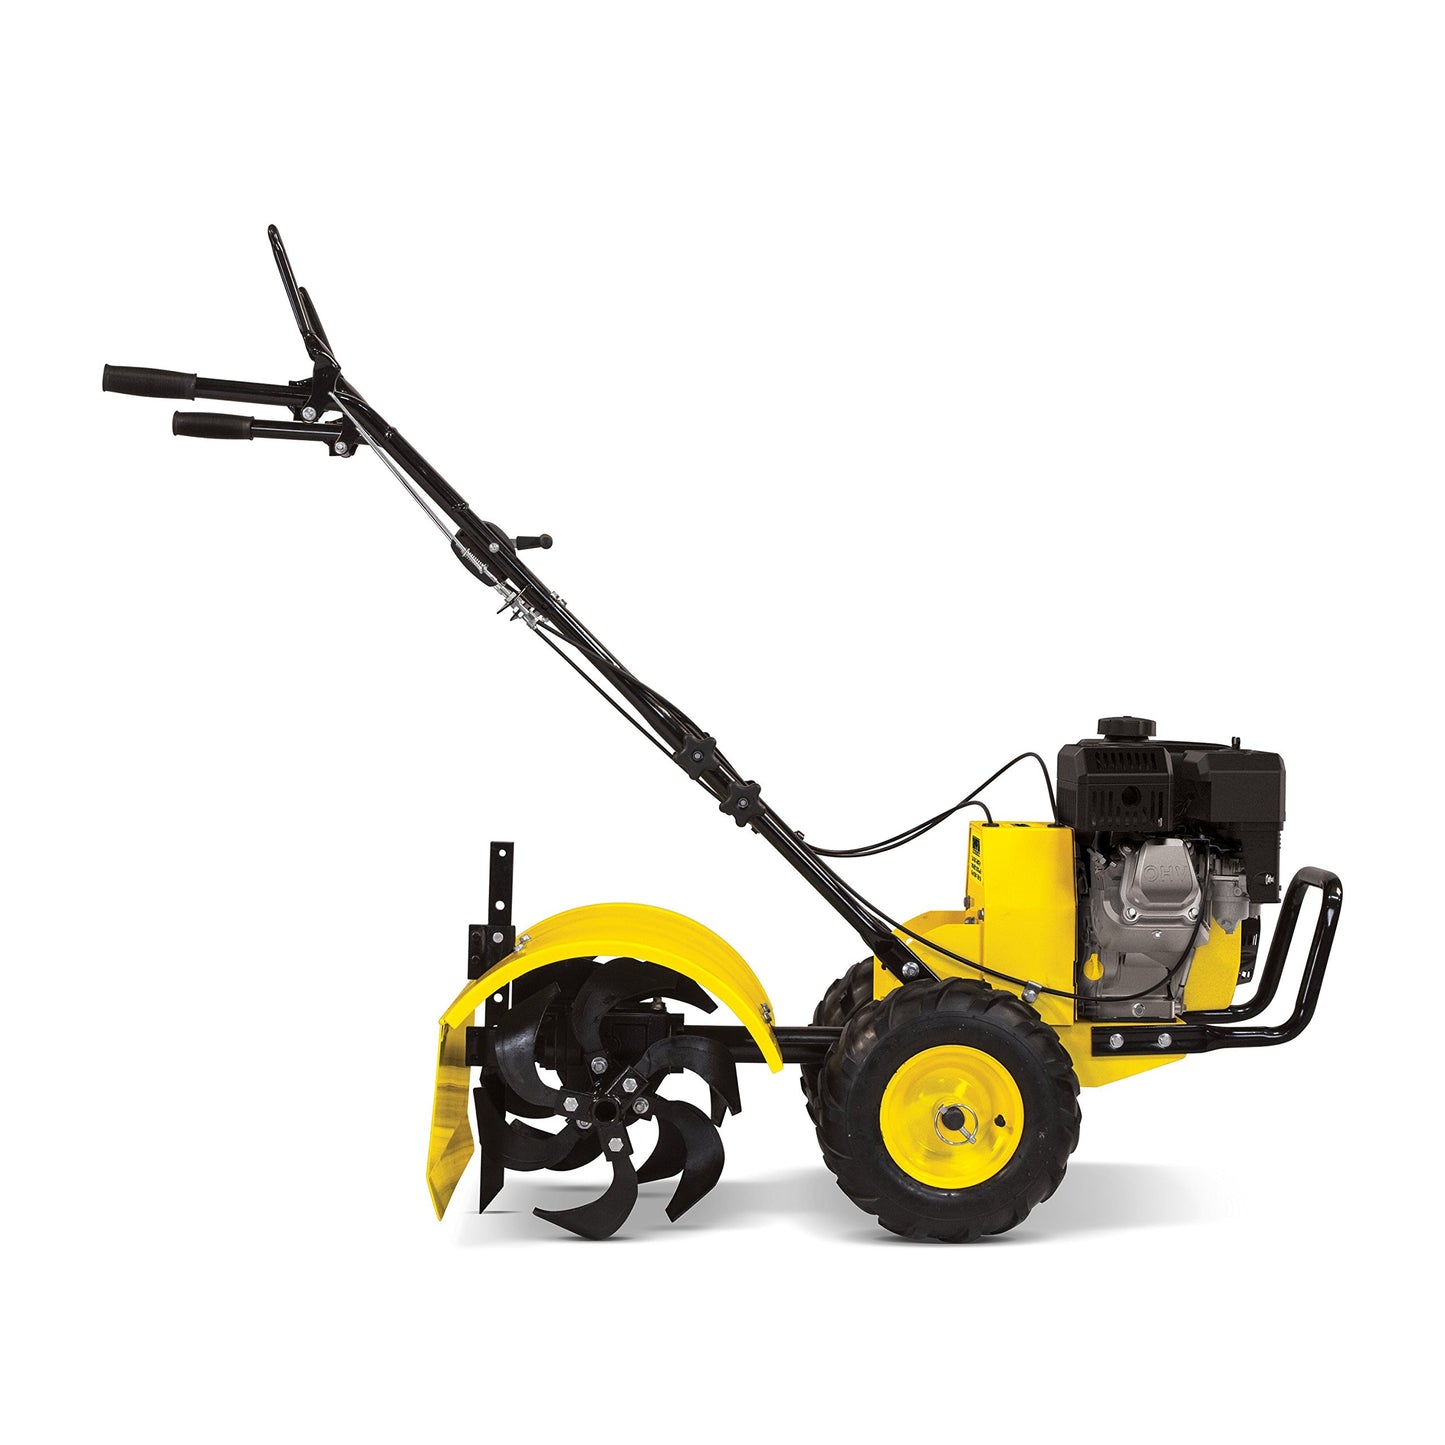 CHAMPION POWER EQUIPMENT 19-Inch Dual Rotating Rear Tine Tiller with Self-Propelled Agricultural Tires 19" + Rear Tine + 212cc Engine